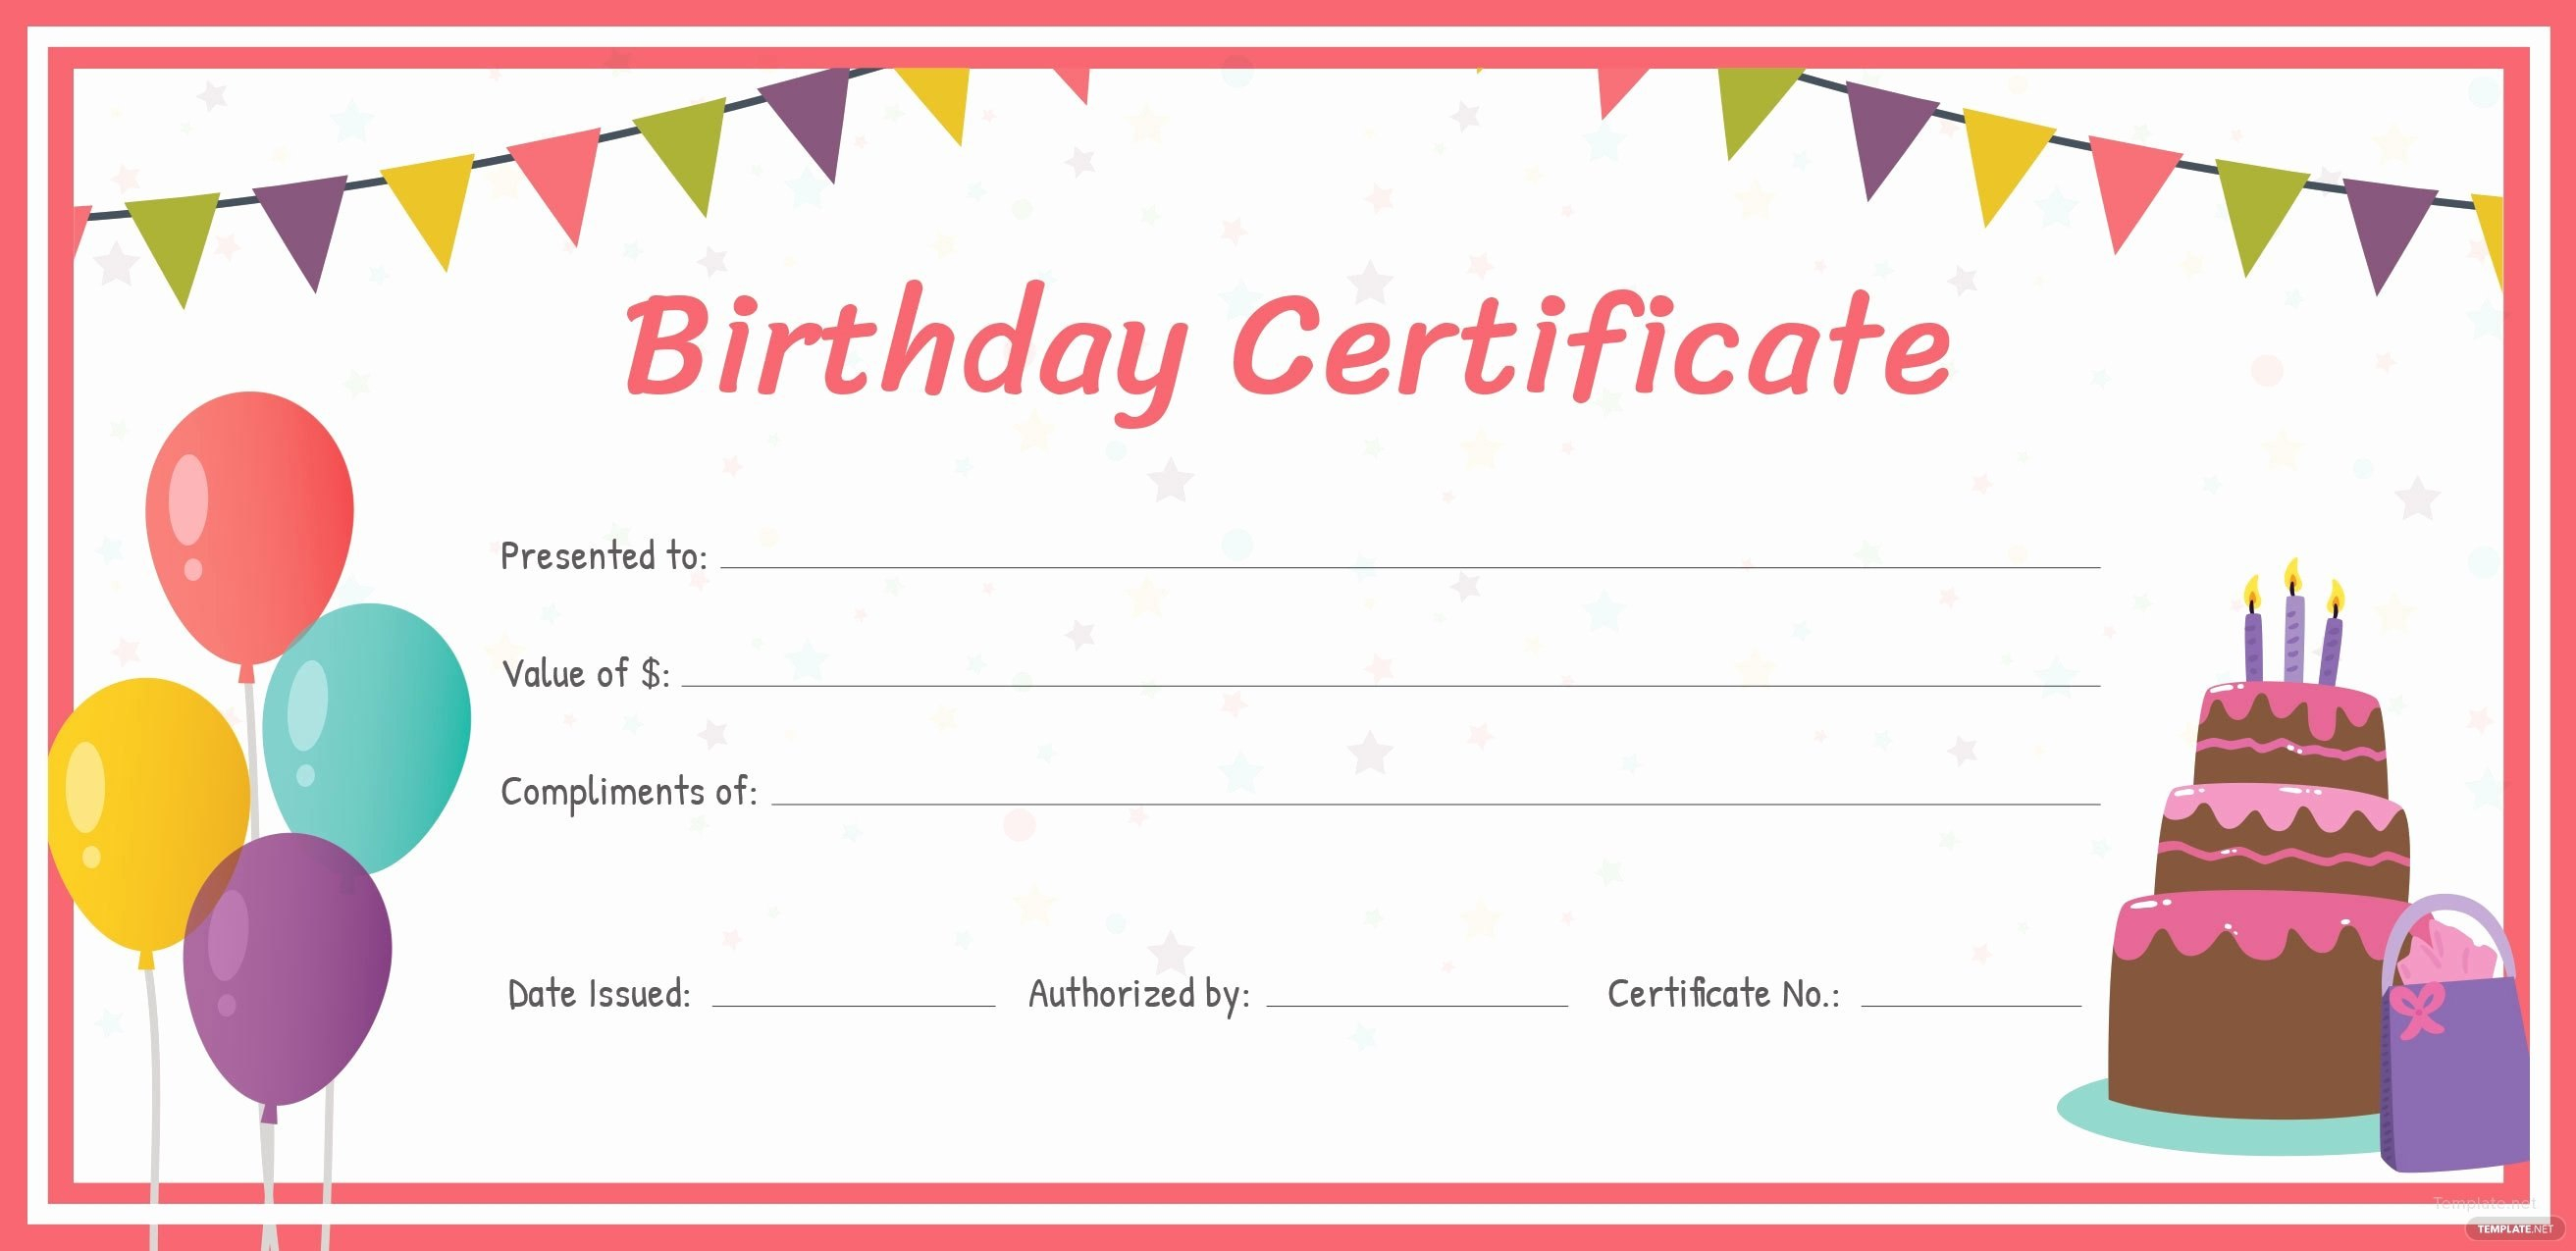 Editable Gift Certificate Template Luxury Free Birthday Gift inside Fillable Gift Certificate Template Free